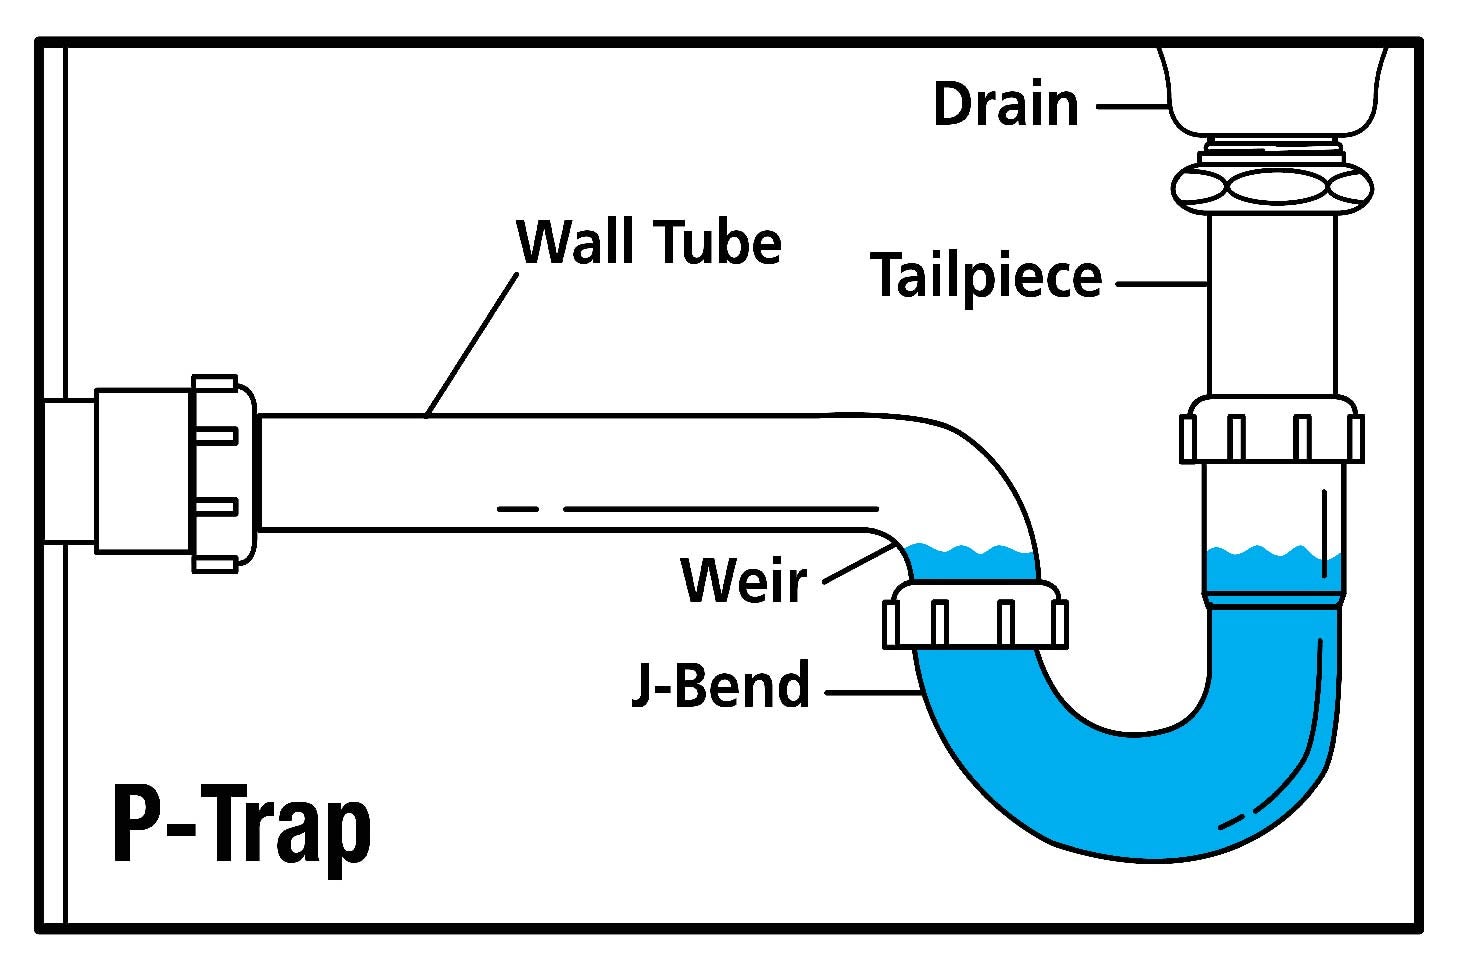 How to connect a sink drain to a p-trap - Quora